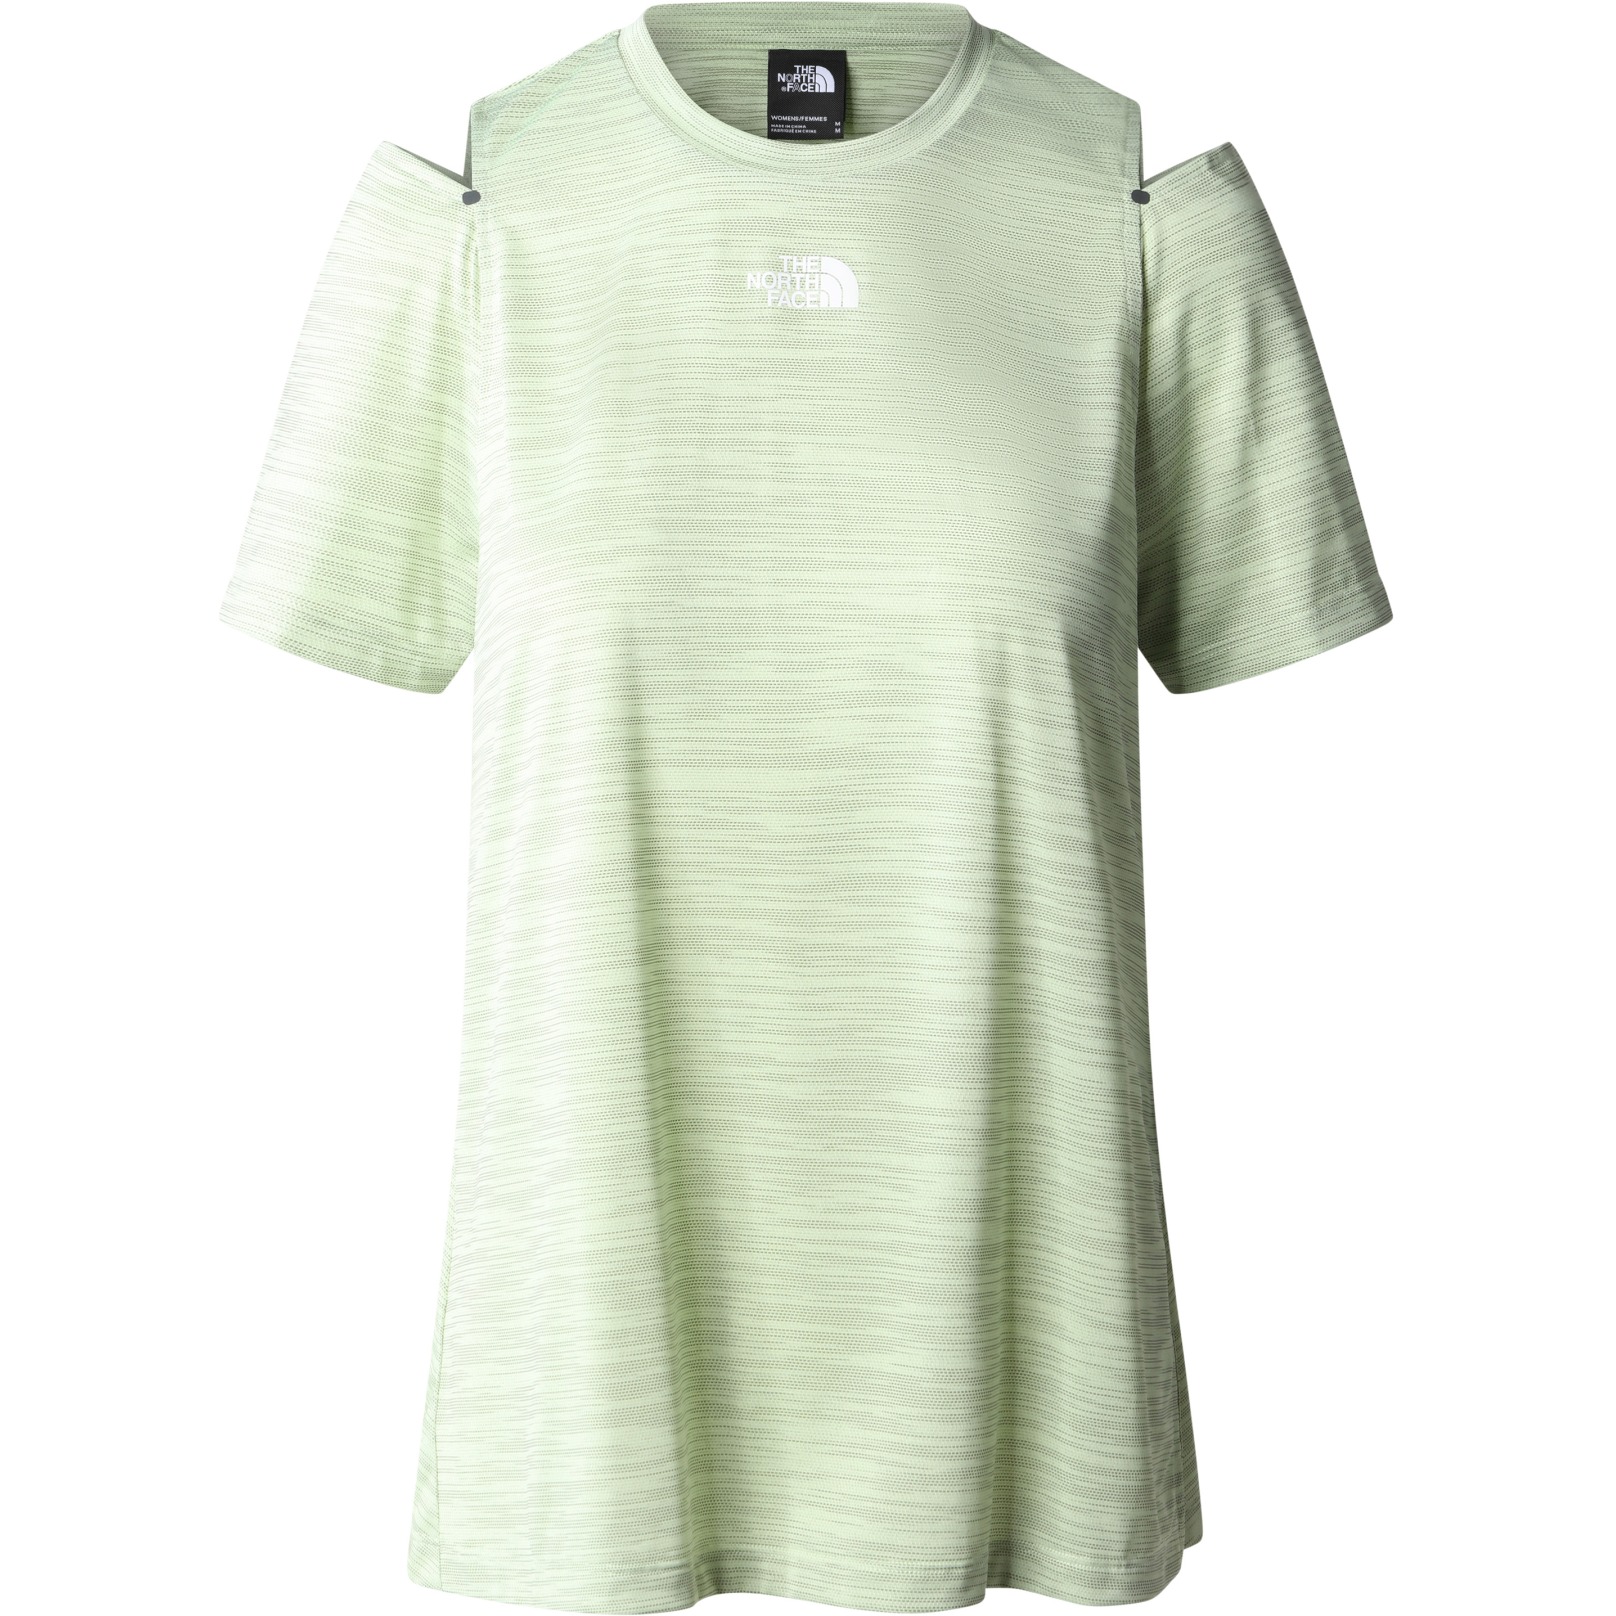 Image of The North Face Athletic Outdoor T-Shirt Women - Lime Cream/New Taupe Green